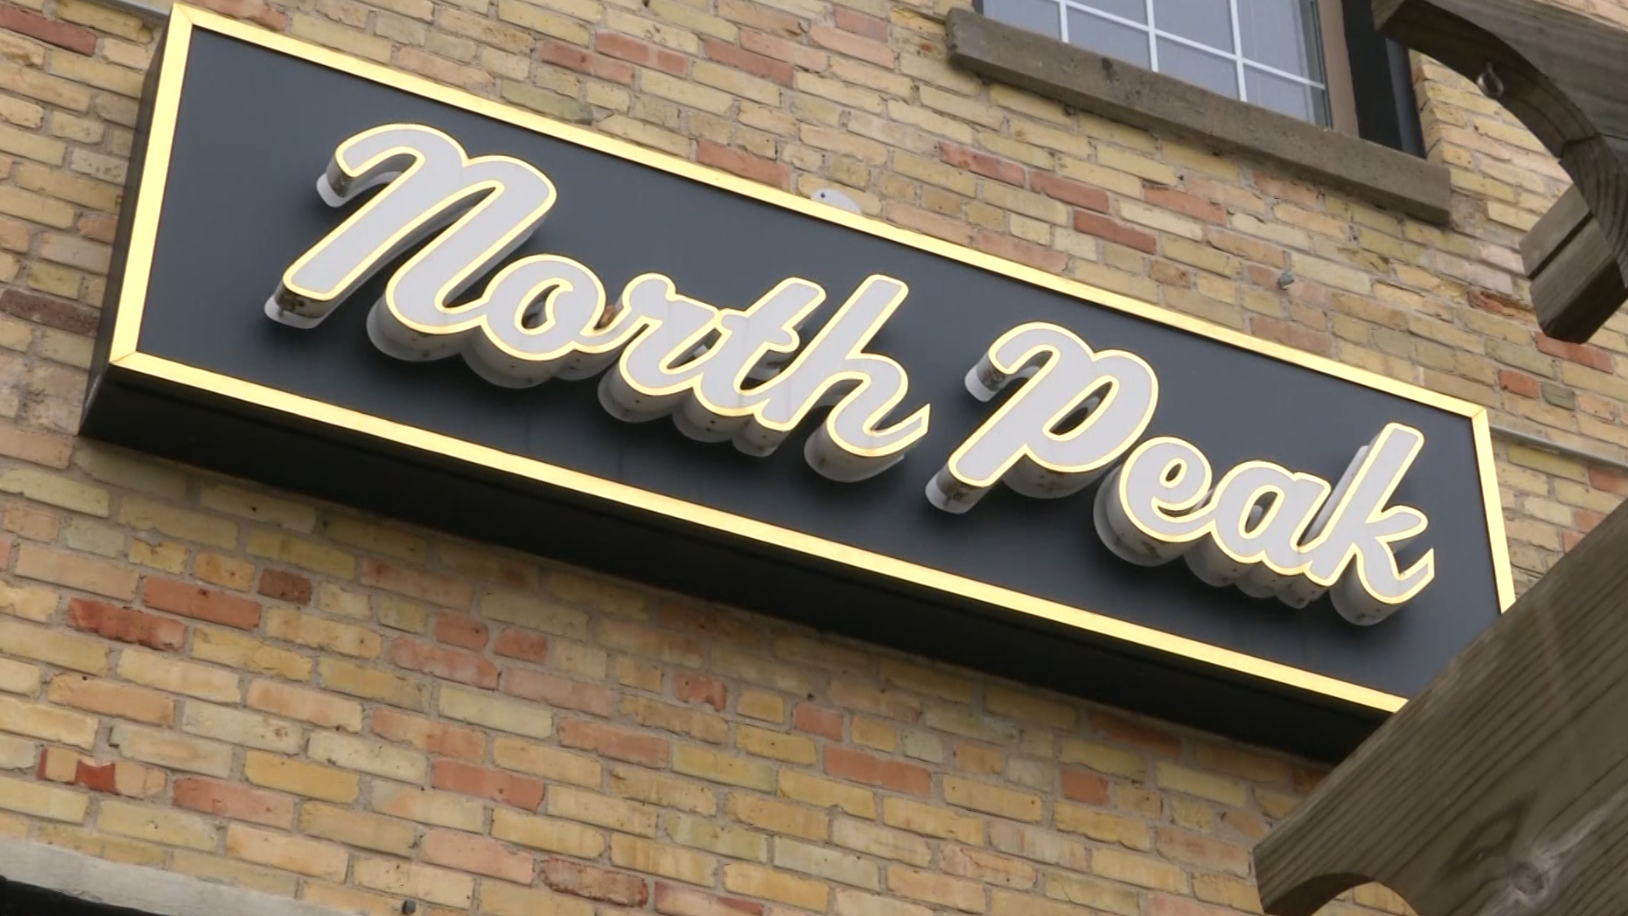 Brewvine: Summer Food, Fun, Suds and Sun at North Peak Brewing Company